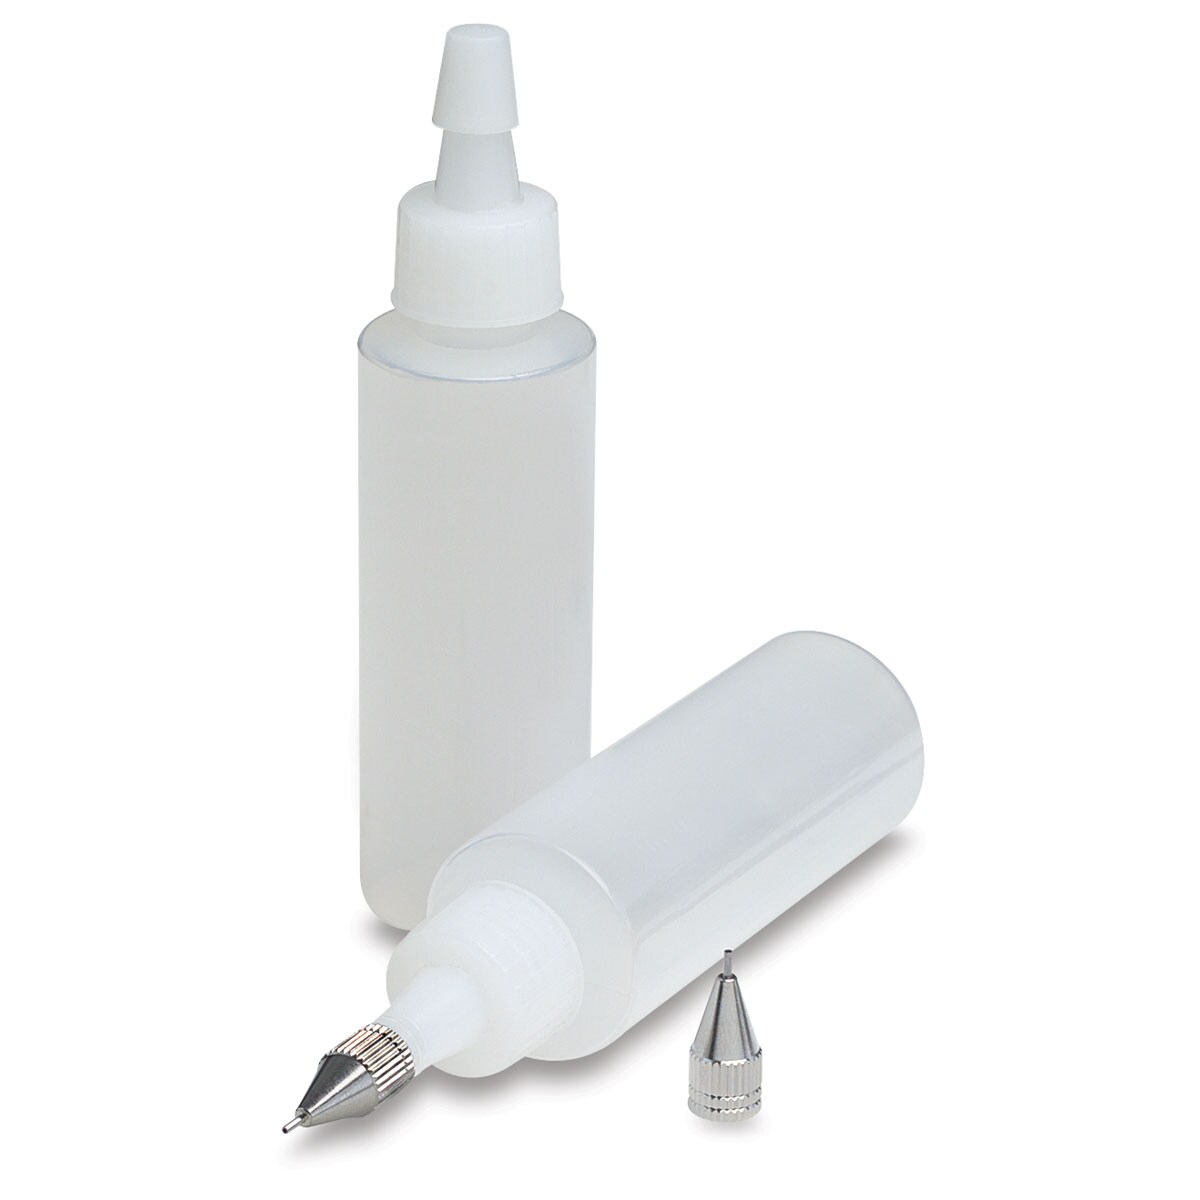 Pebeo Applicator Bottles and Tips - Set of 2